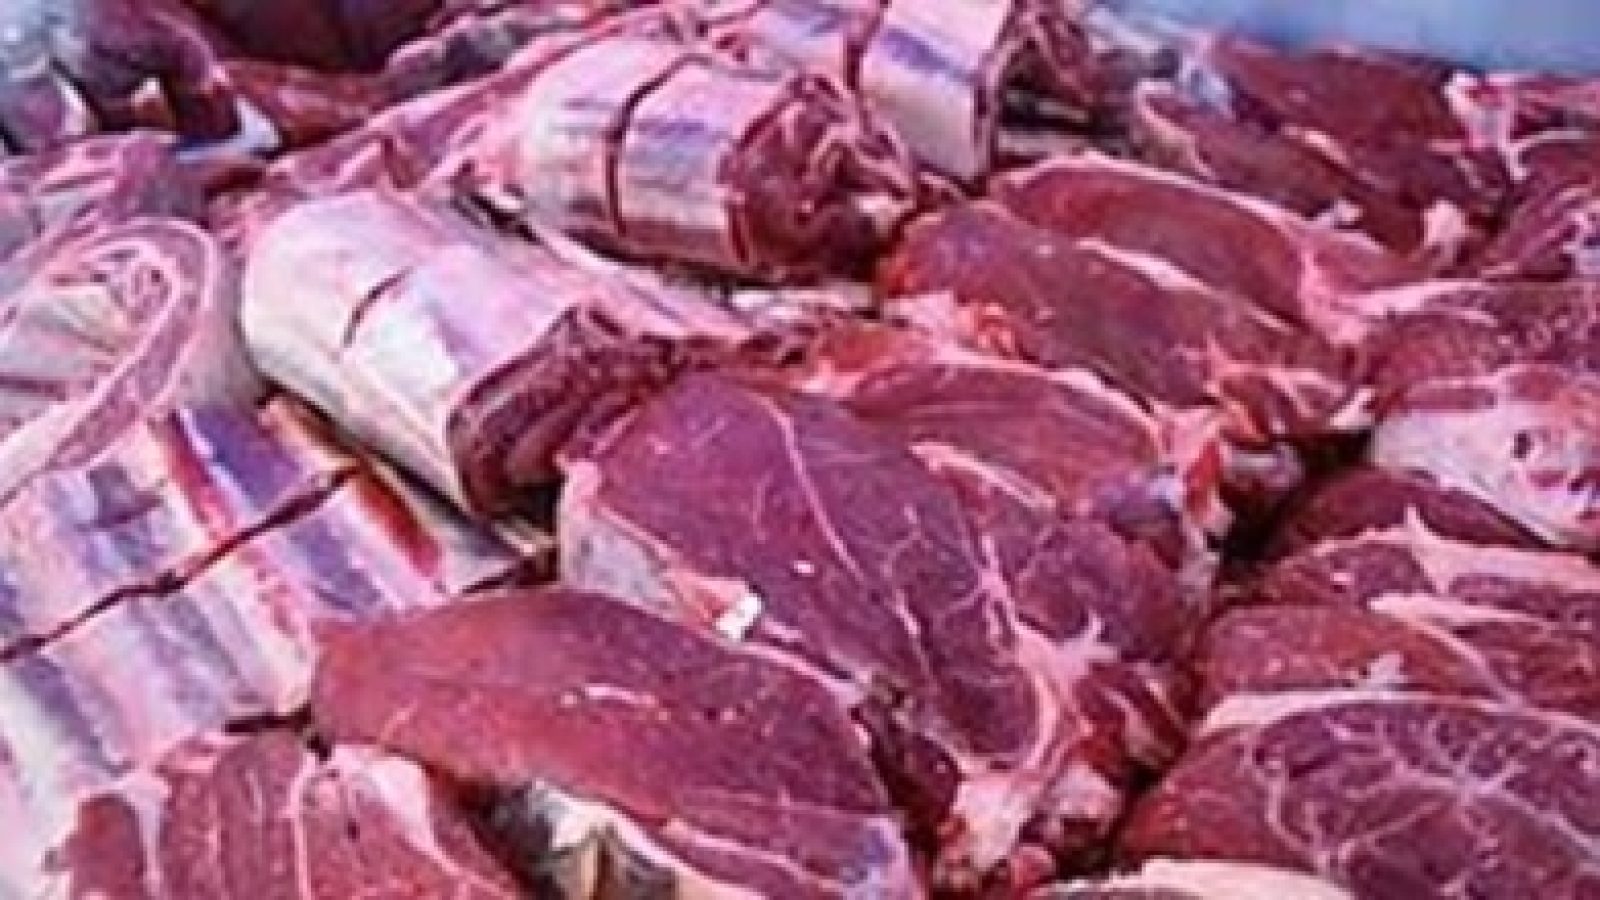 lawmakers want ban on imported beef from paraguay animal health food safety concerns